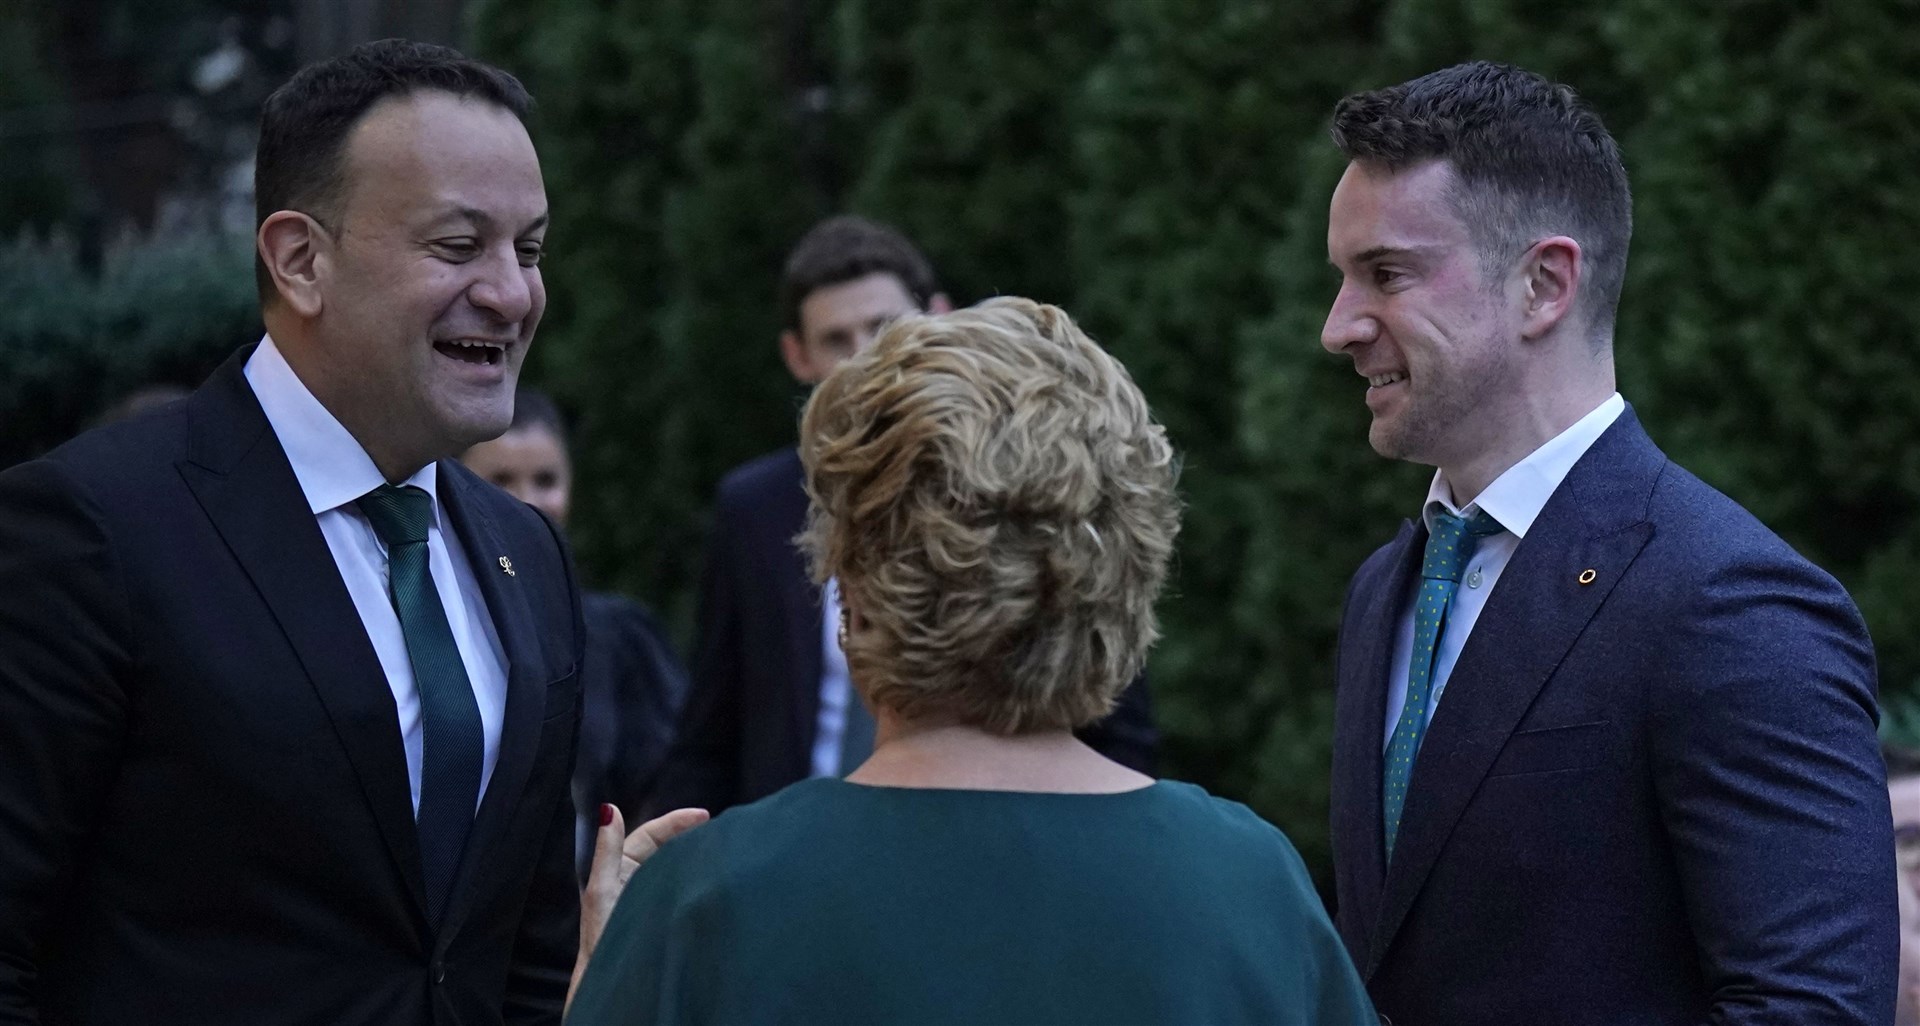 Mr Varadkar and his partner Matt Barrett arrive for a St Patrick’s Day Reception hosted by the Irish Embassy at the official residence of the Irish Ambassador Geraldine Byrne Nason, in Washington, DC (Niall Carson/PA)